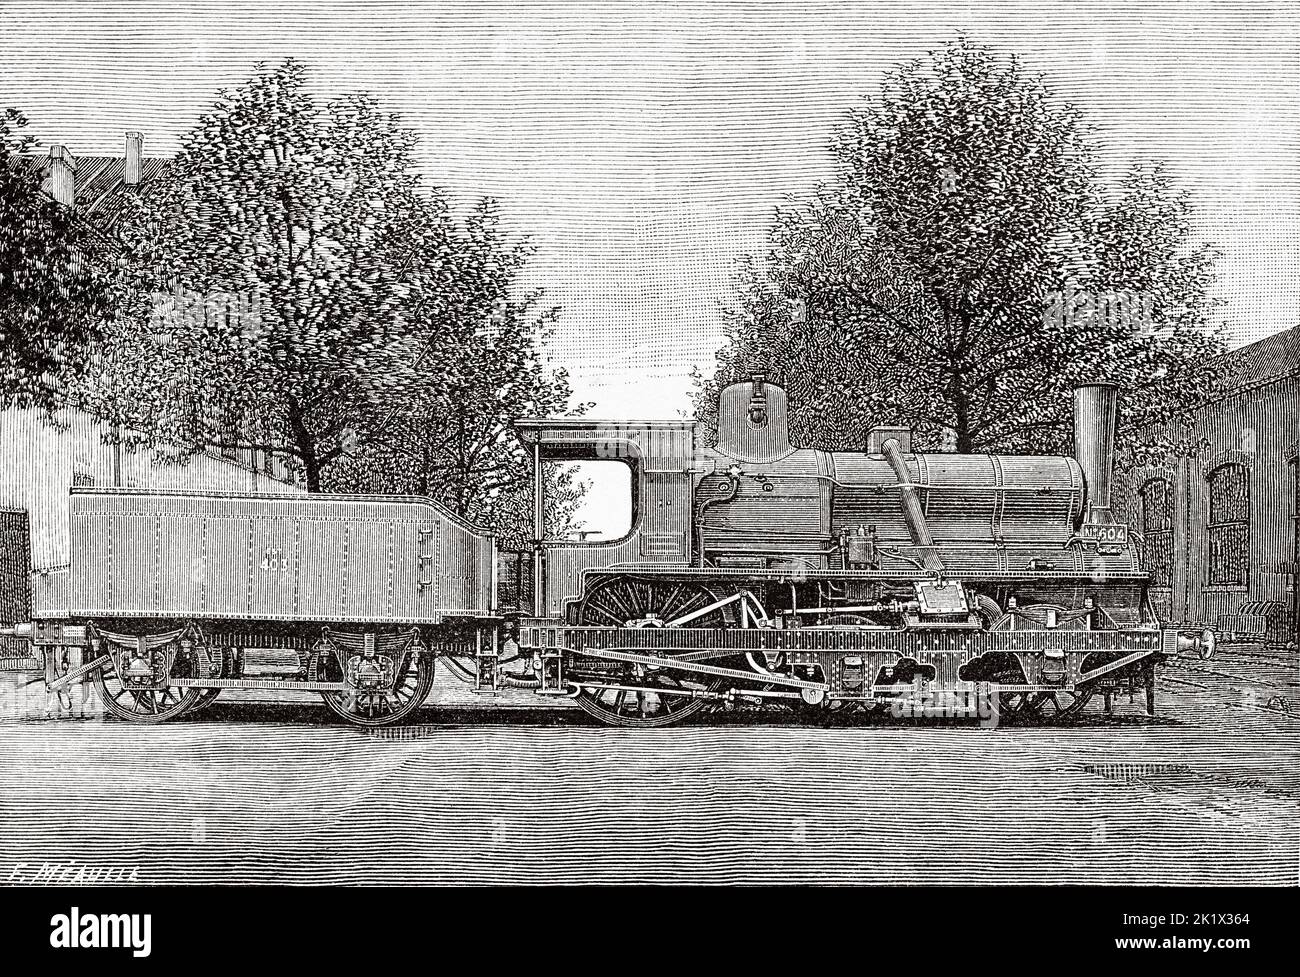 Crampton steam locomotive with Flaman boiler. Old 19th century engraved illustration from La Nature 1890 Stock Photo